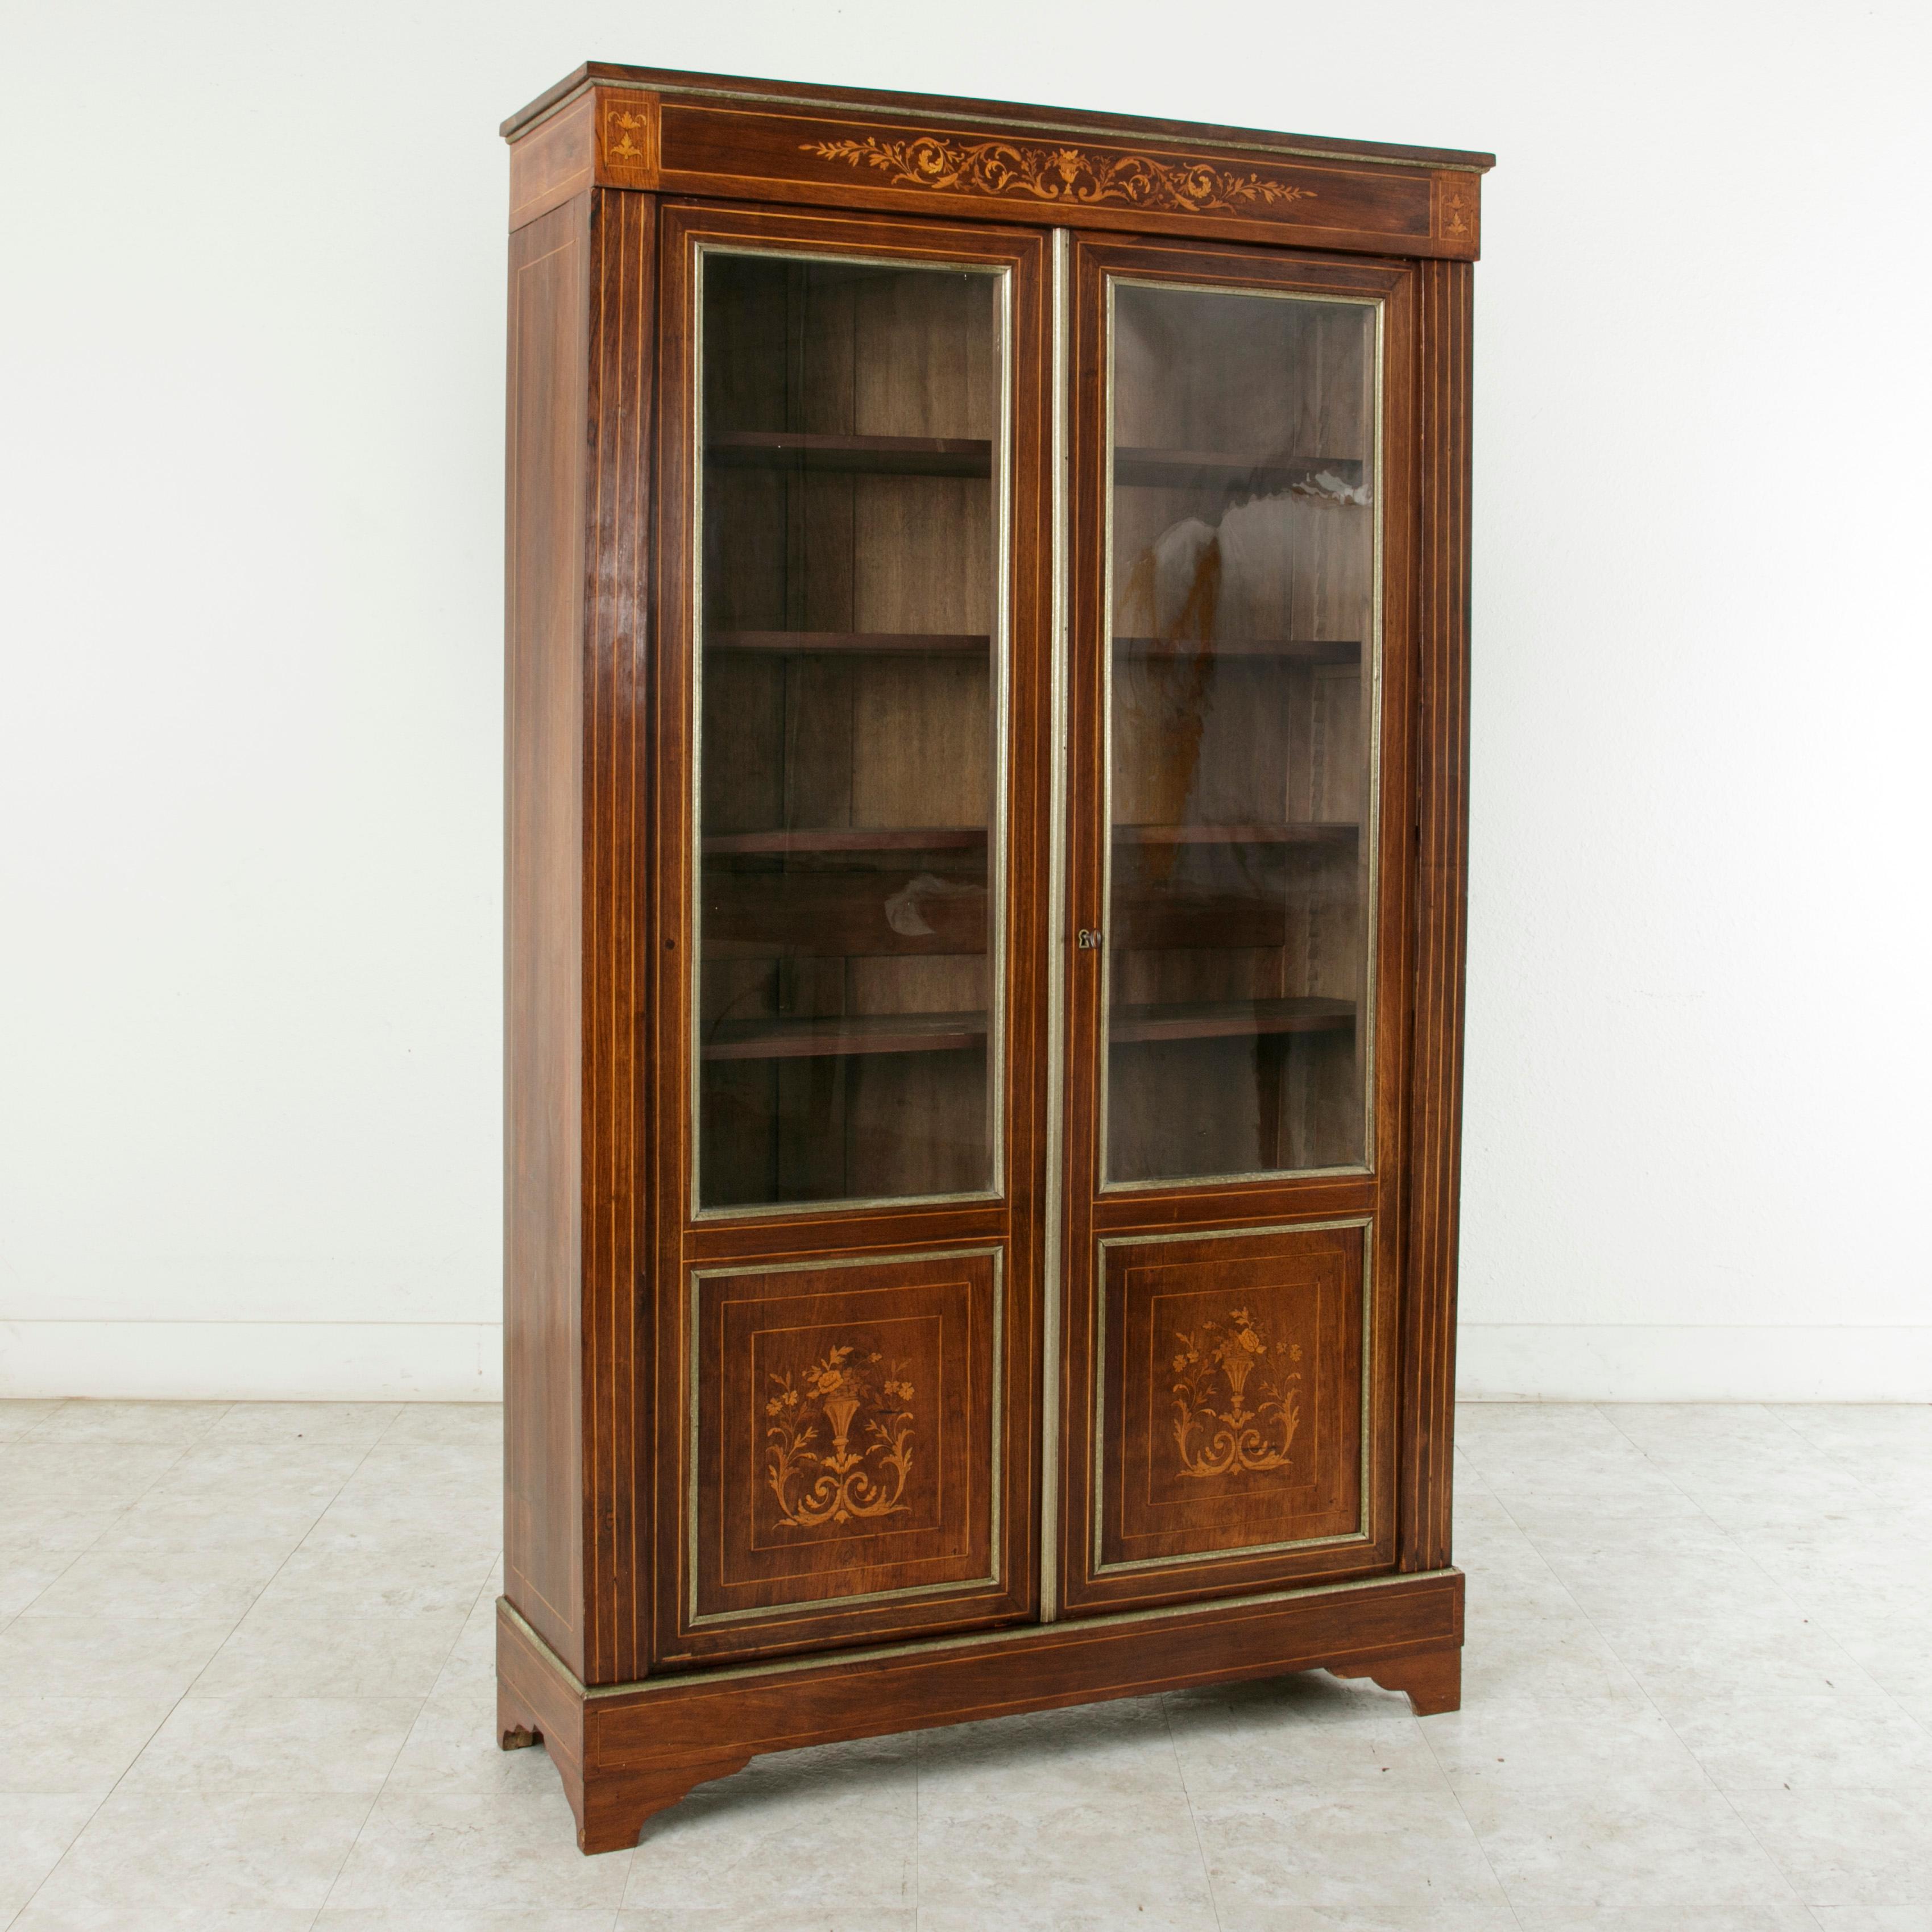 This early 19th century French Charles X period mahogany bibliotheque, bookcase, or vitrine features fine lines of lemon wood that frame the facade and make up the marquetry fluted columns. Unusual bronze banding decorated with a flower and leaf